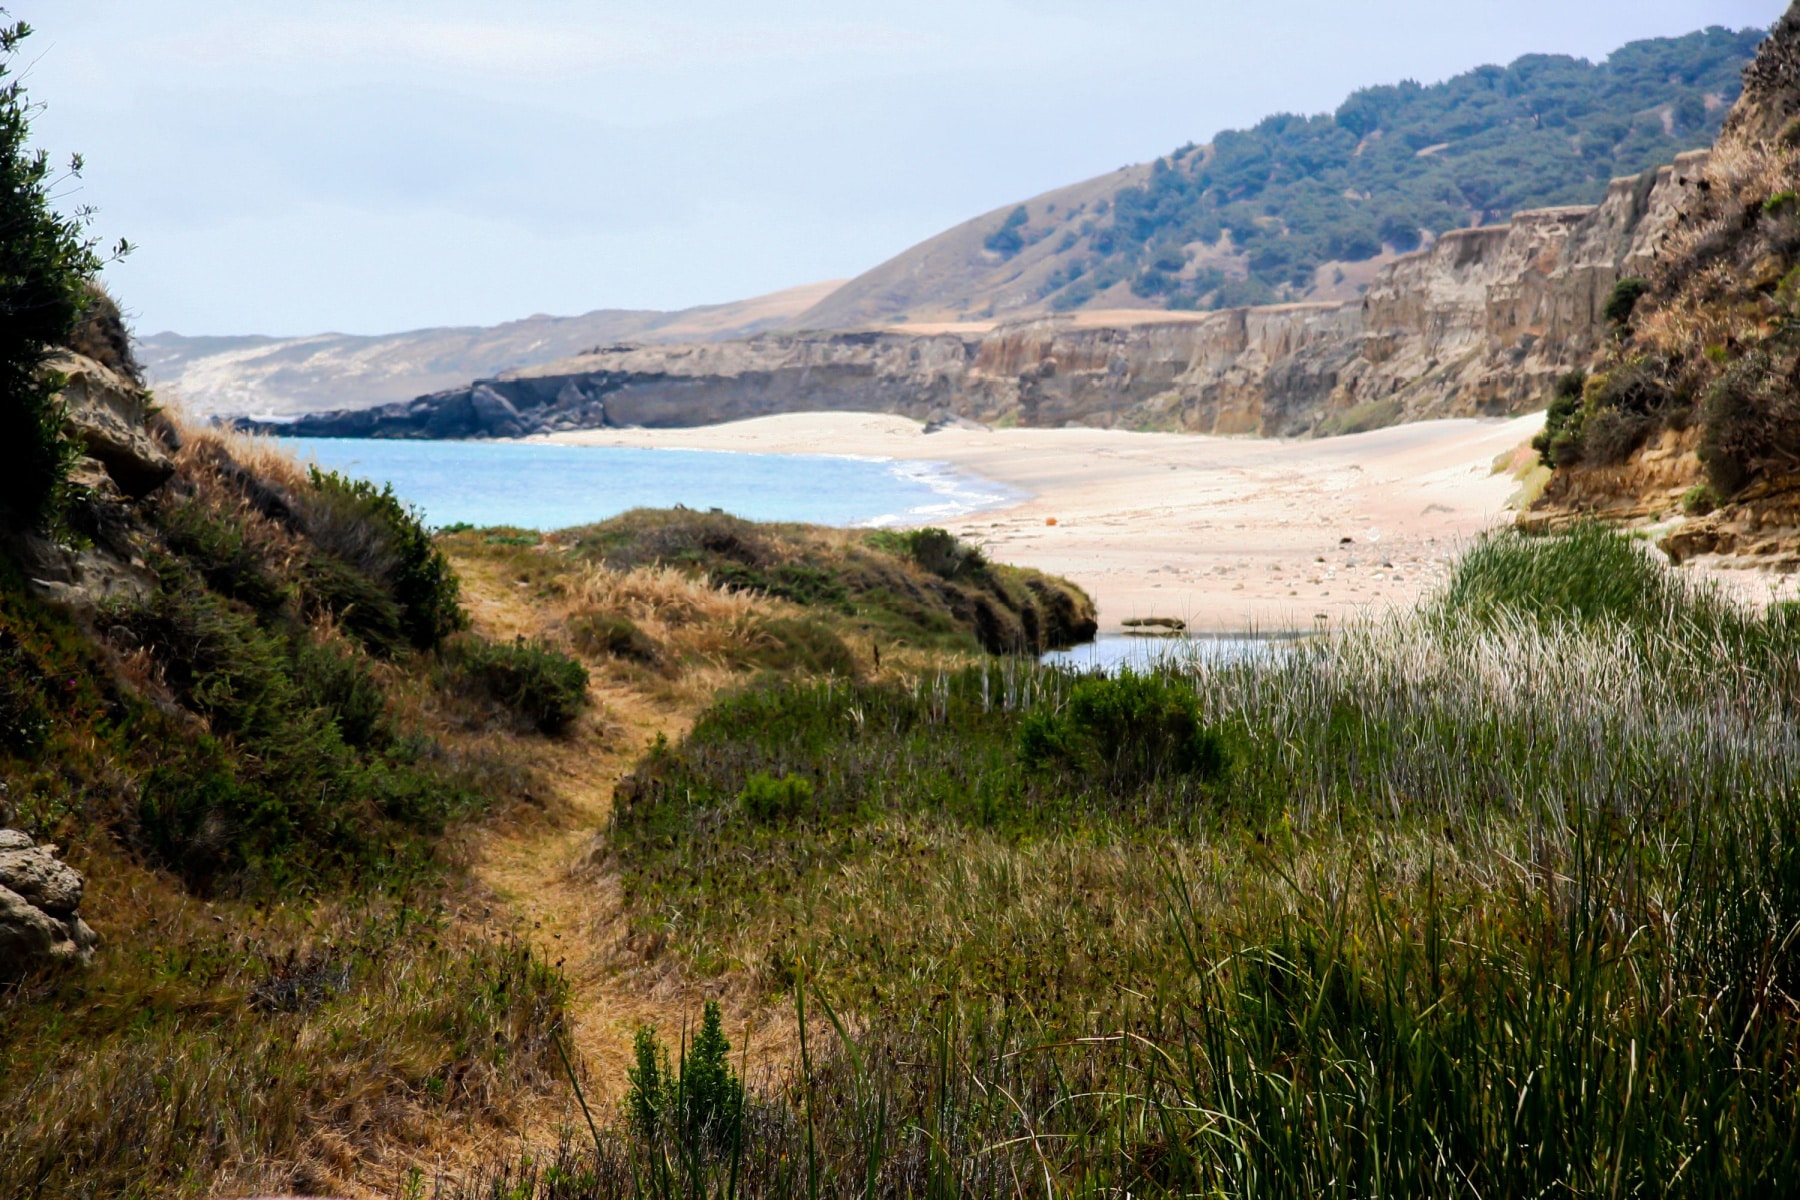 Santa Rosa Island with sandy beaches, cliffs, and grassy areas of Channel Islands National Park.